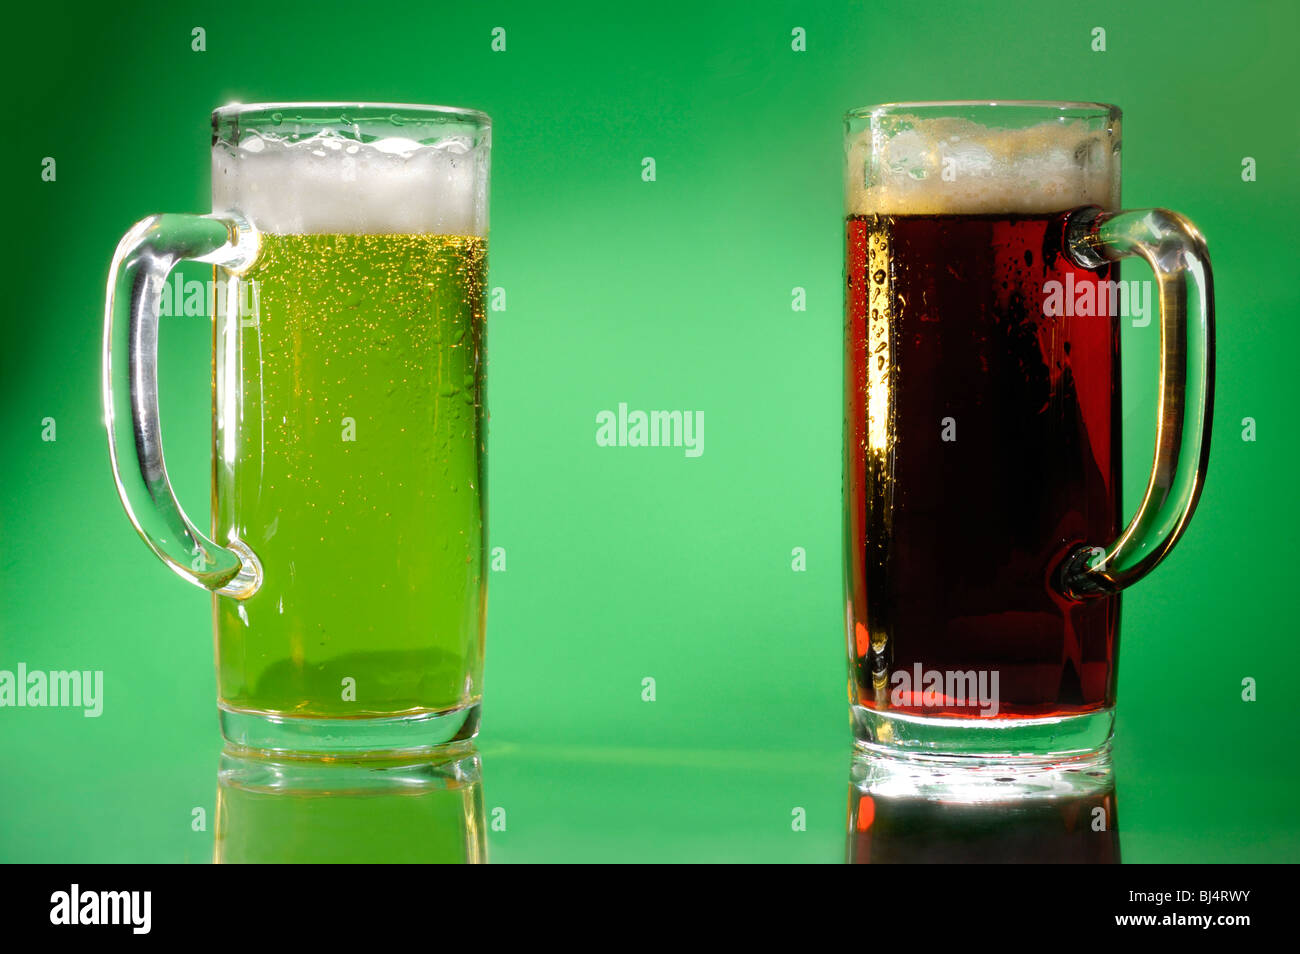 Two glasses with light and dark beer Artistic food still life over green background Stock Photo